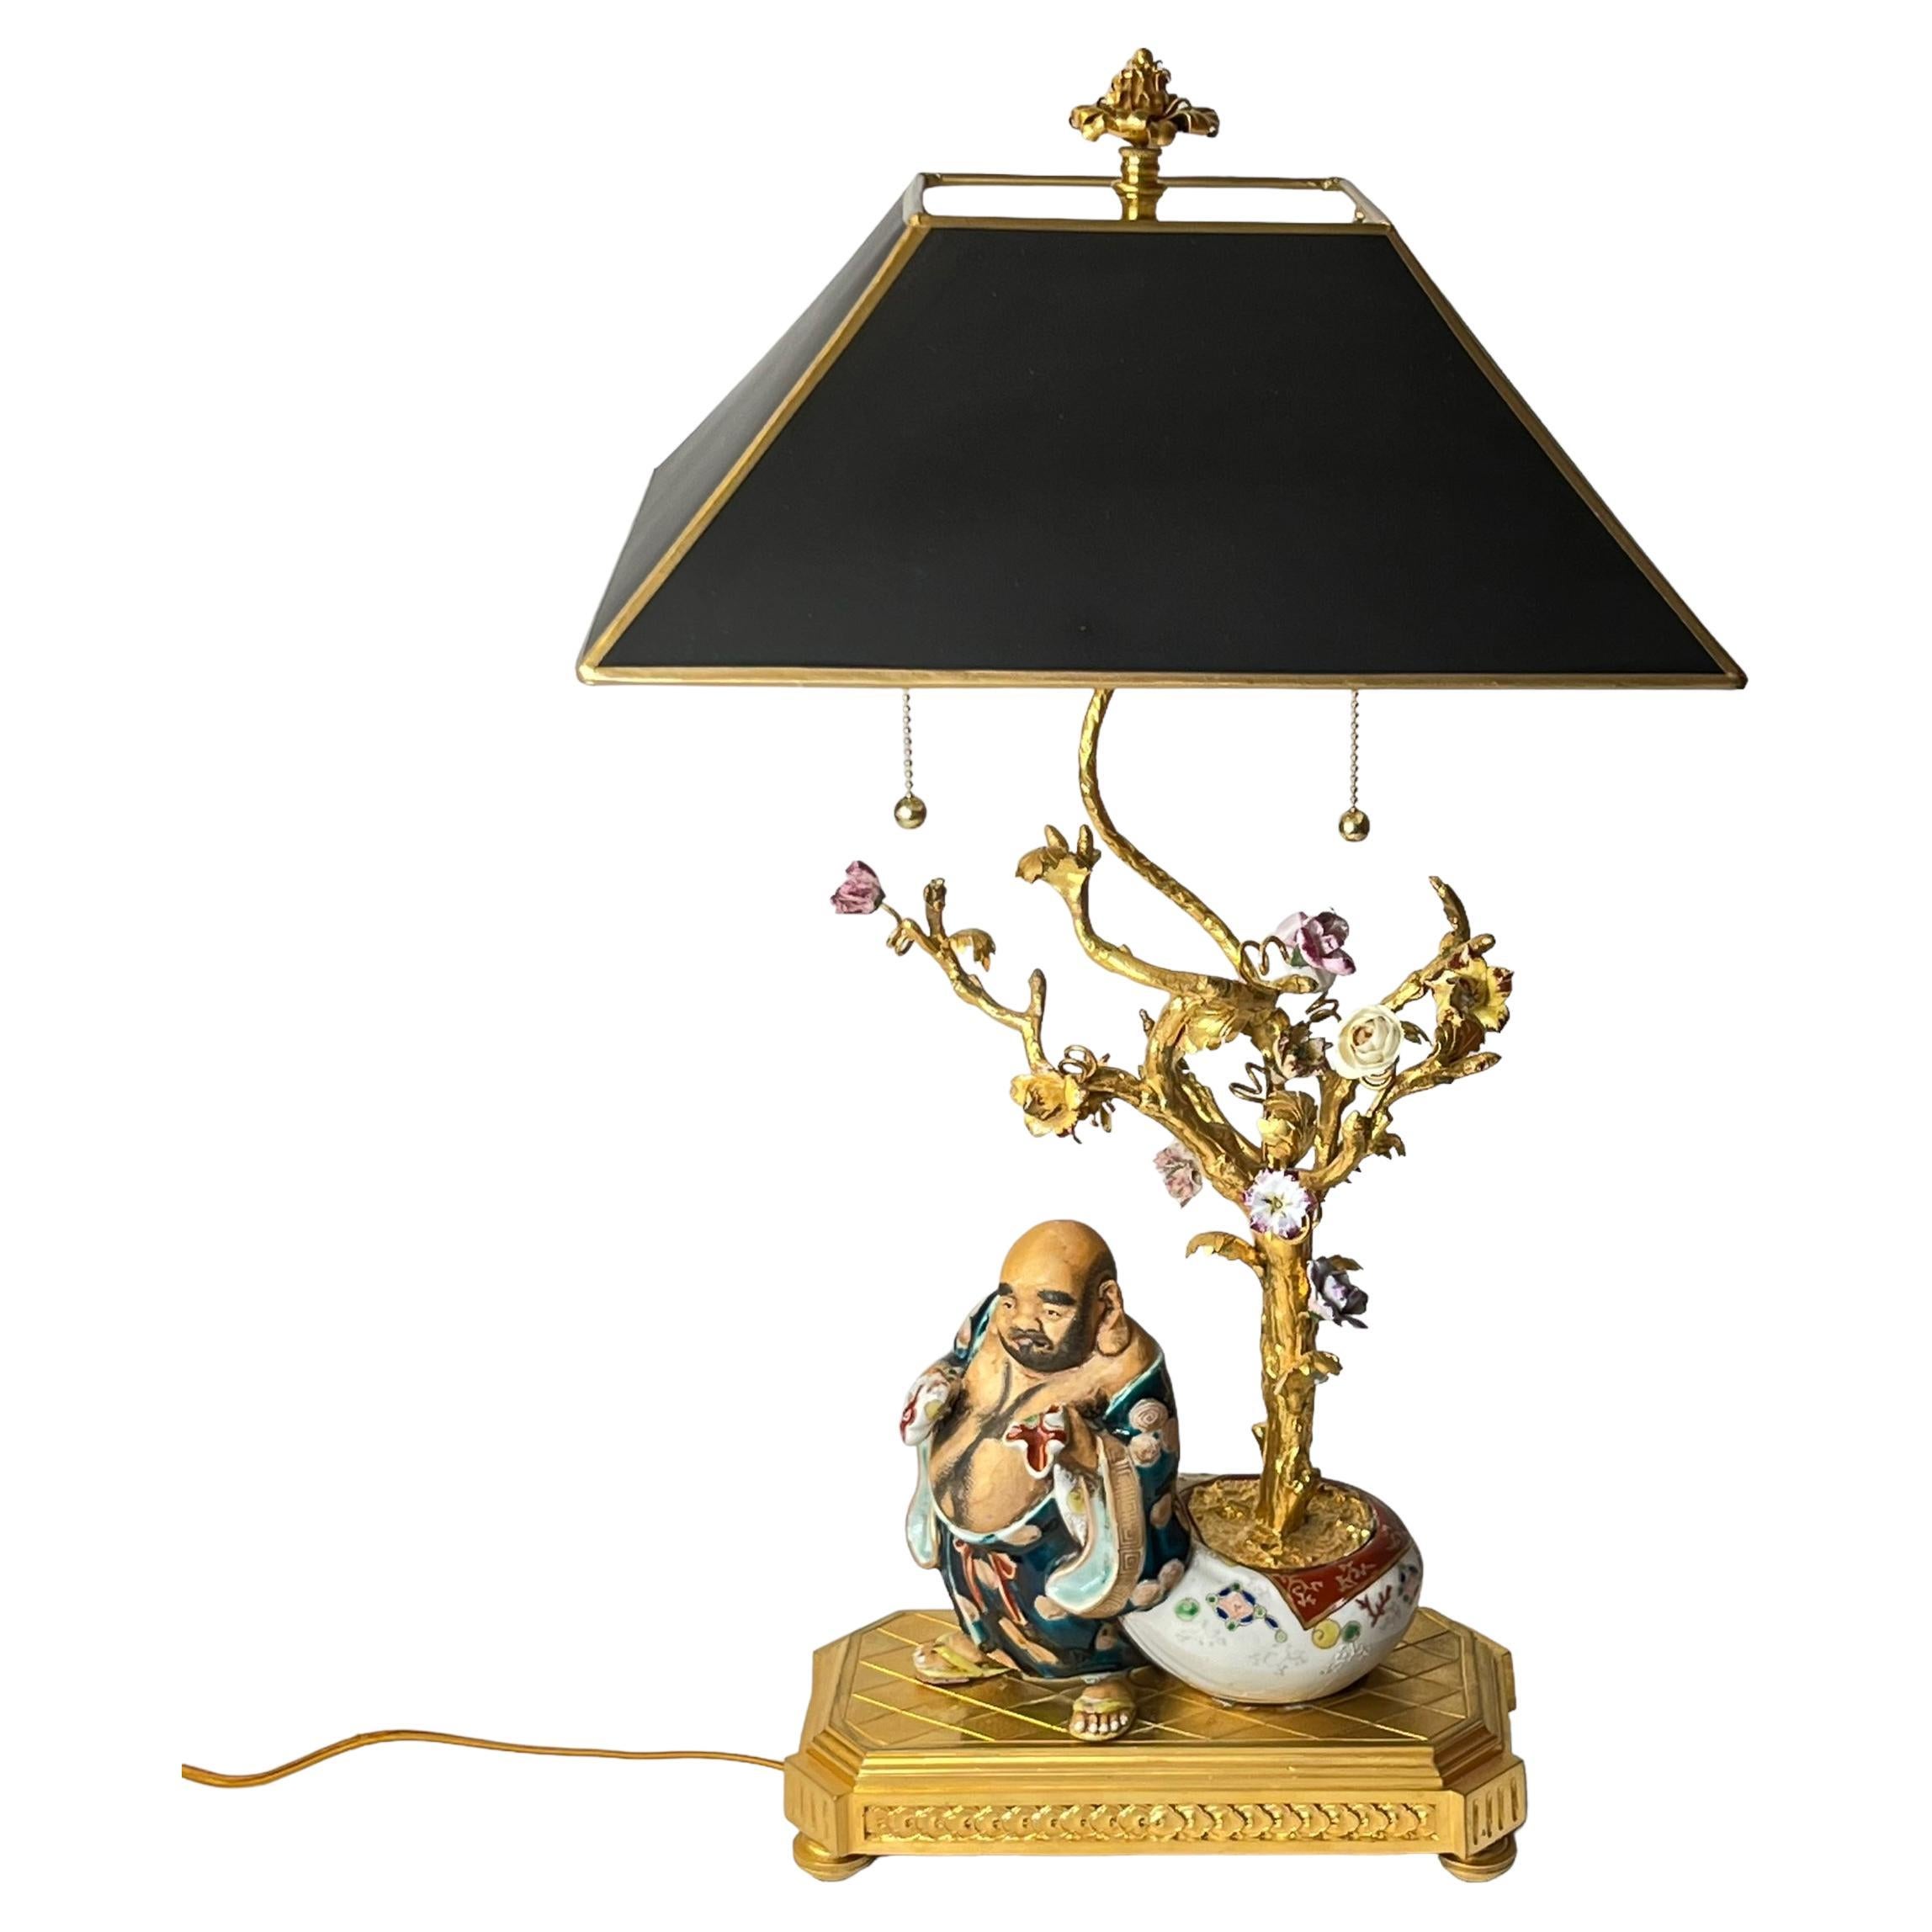 Chinoiserie Porcelain and Gilt Bronze Table Lamp Depicting Budai Laughing Buddha